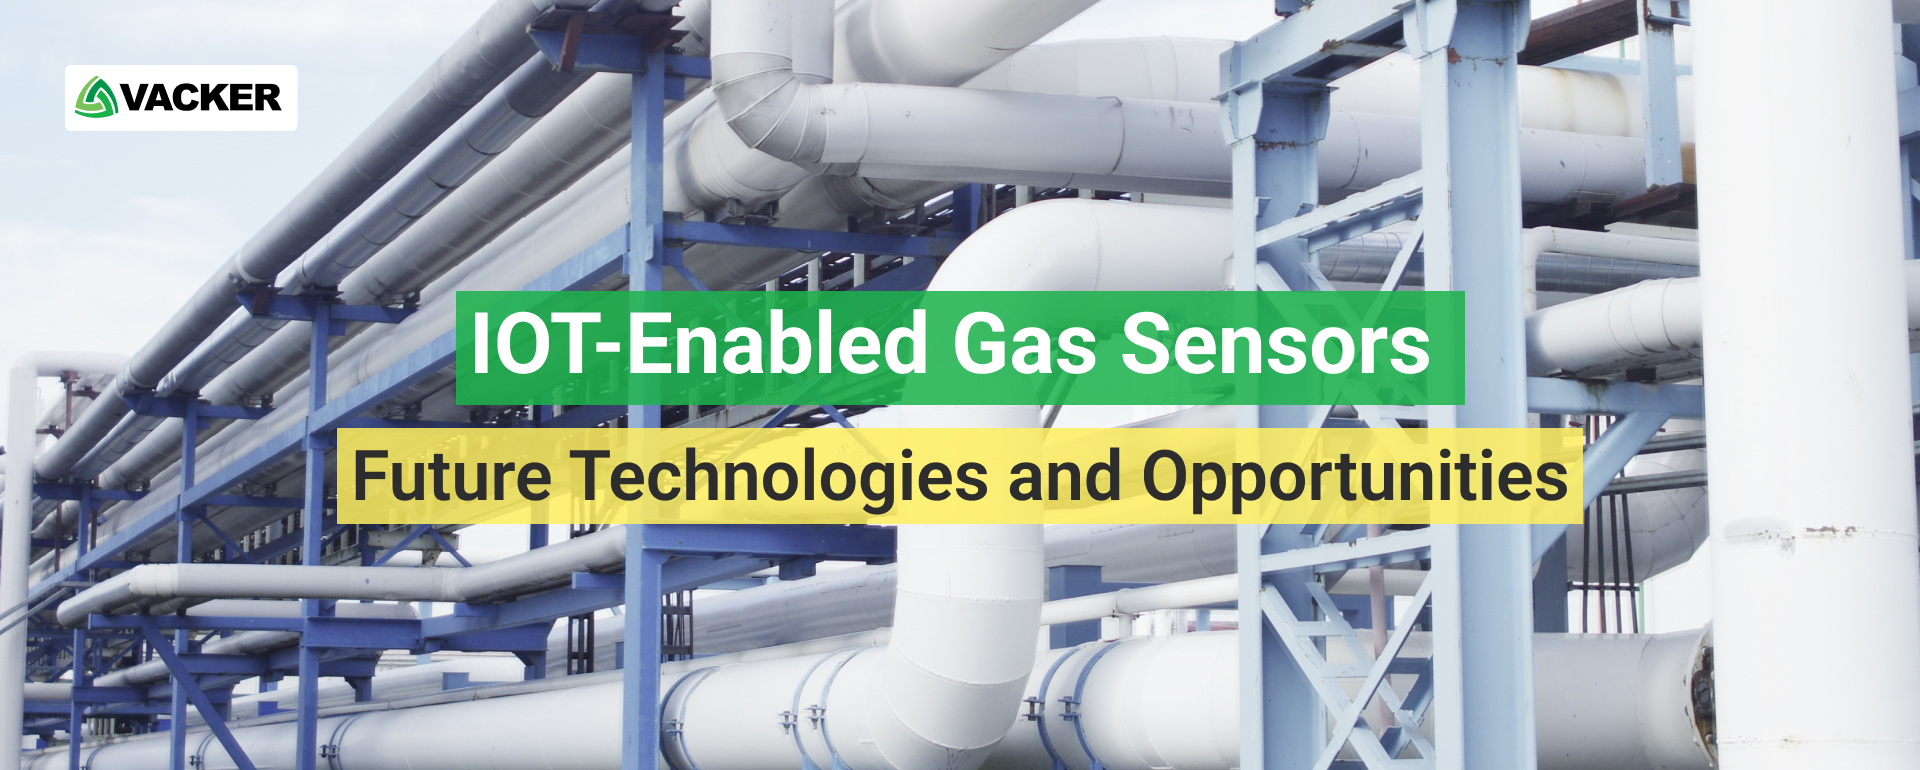 IoT-Enabled Gas Sensors: Future Technologies and Opportunities